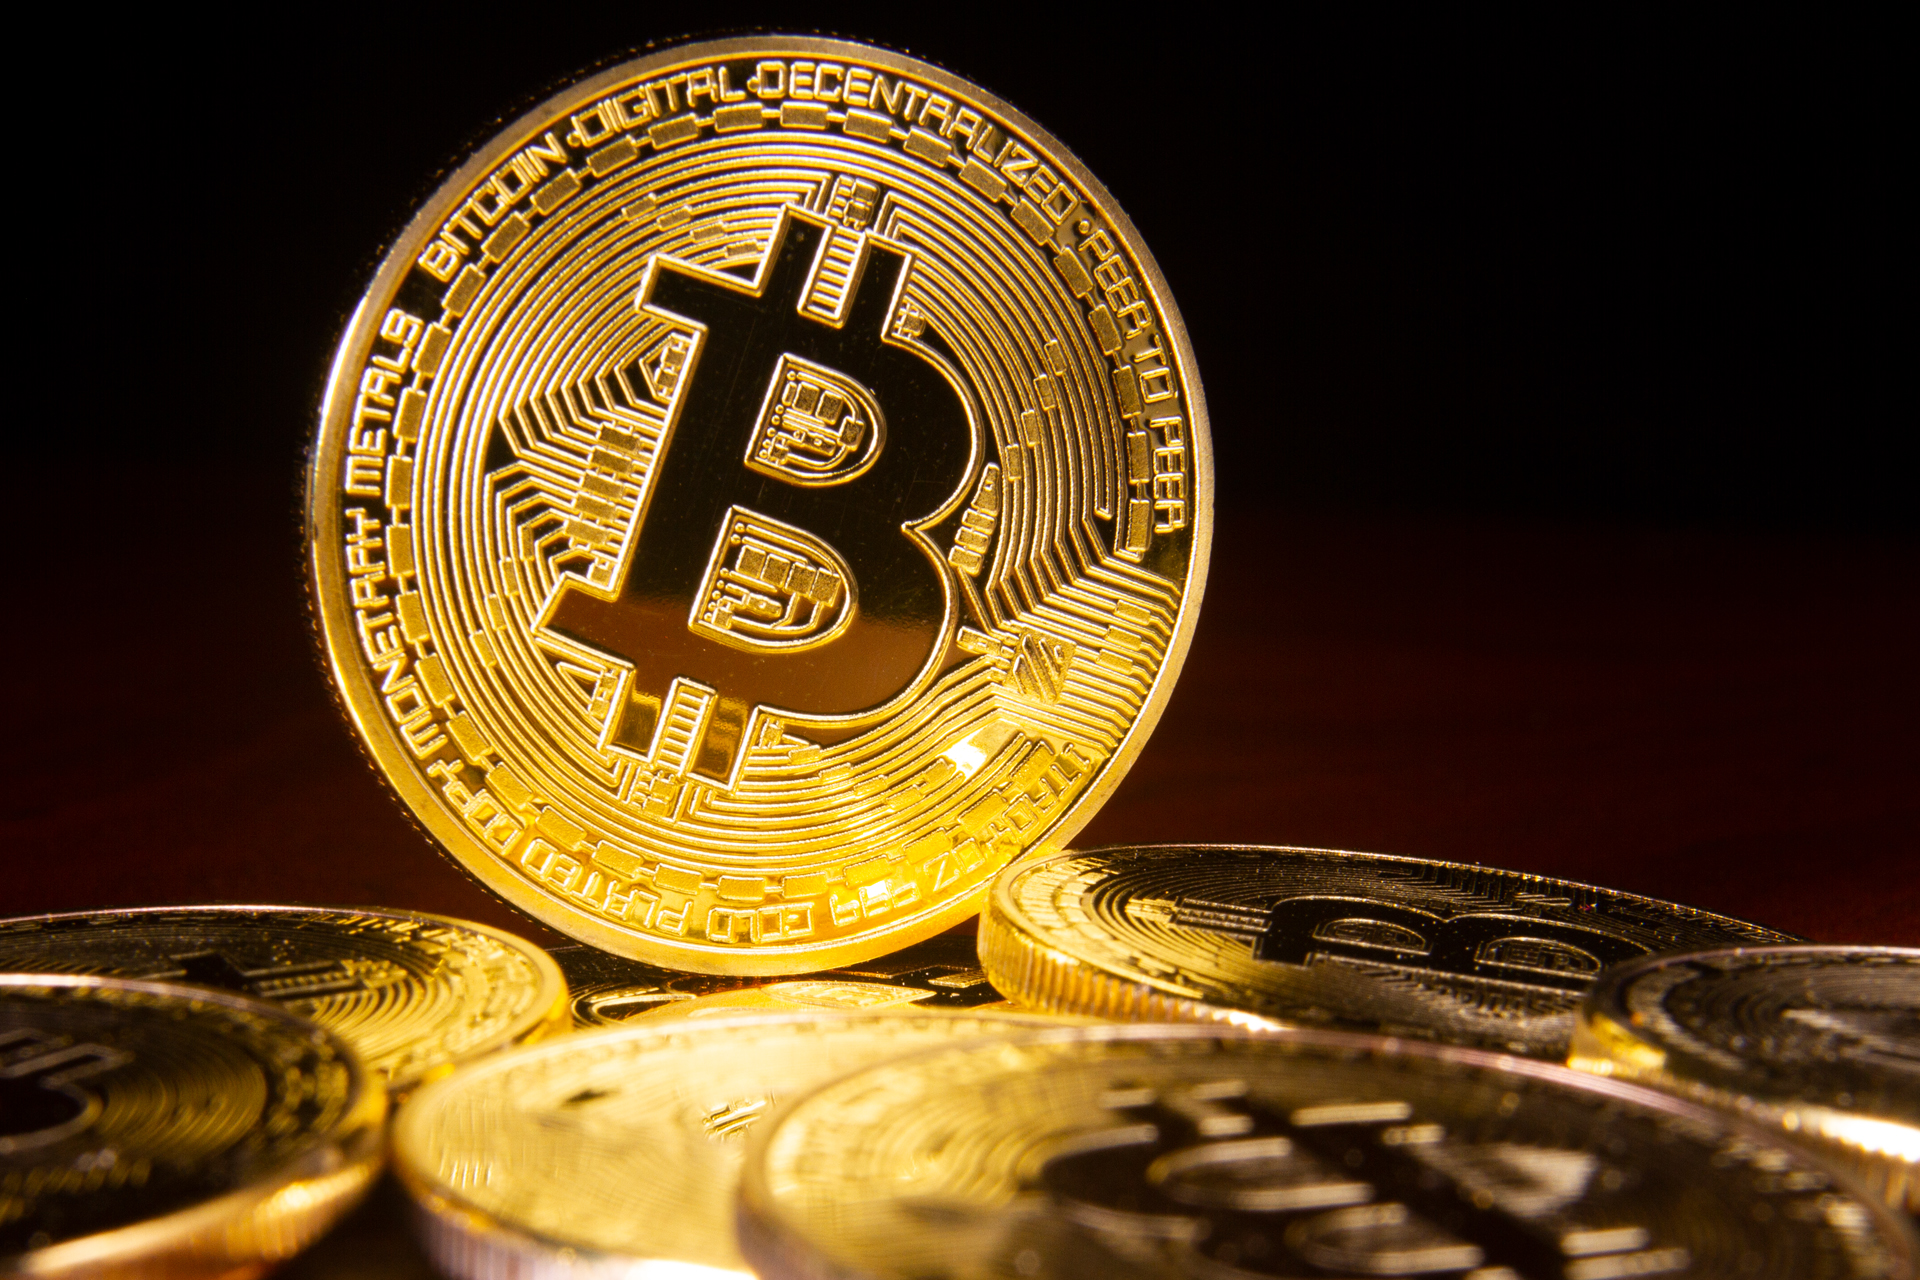 Bitcoin standing in pile free image download